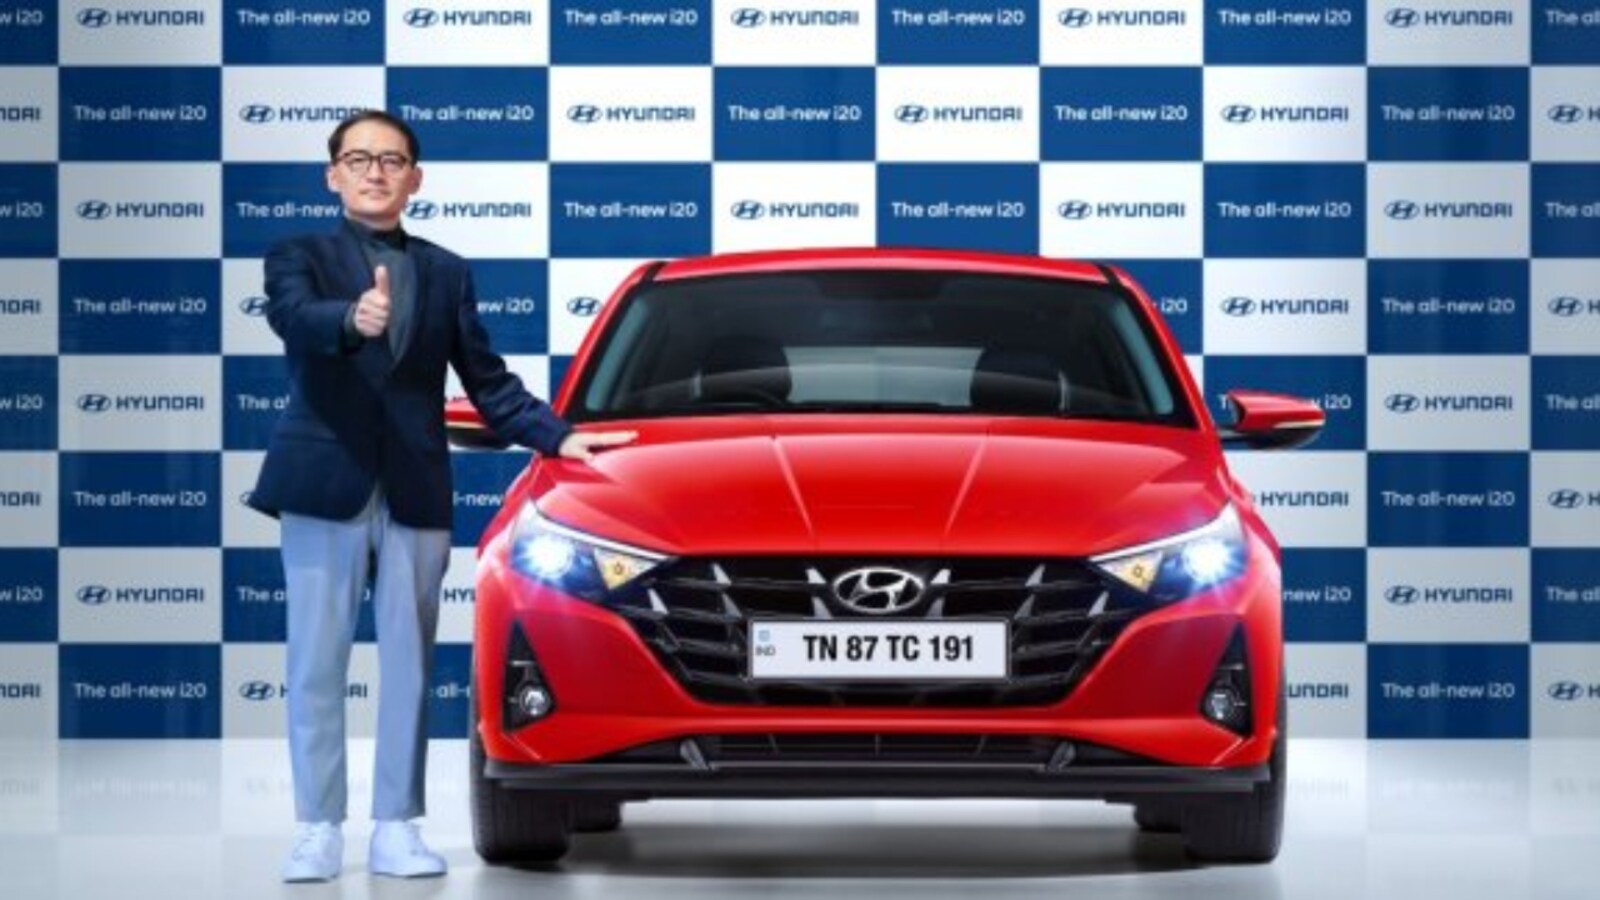 Launch report: Hyundai launches the new i20 in India